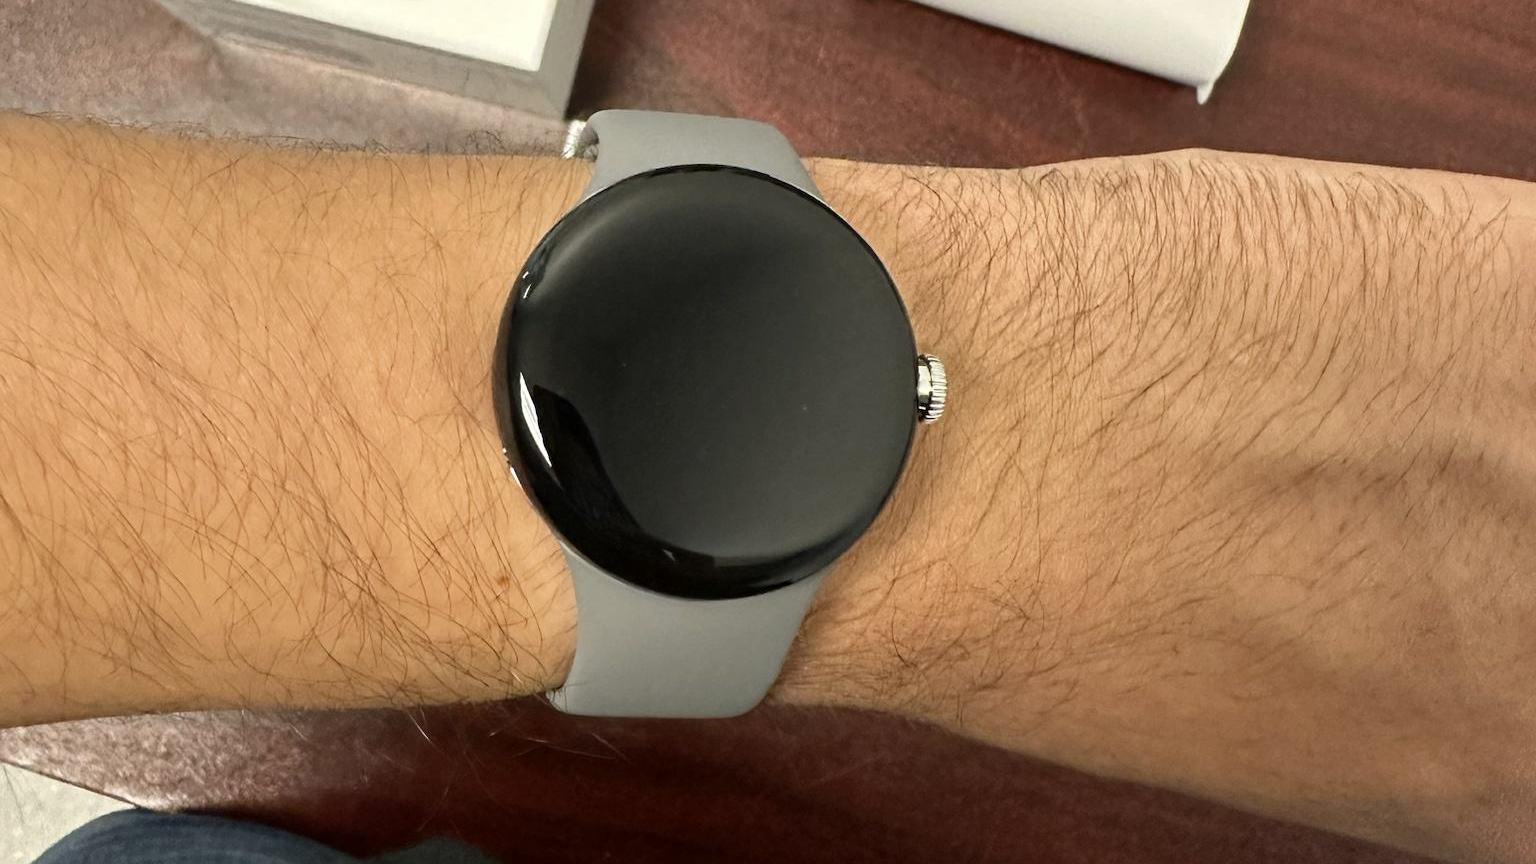 A pre-release unboxing of what looks to be the Google Pixel Watch